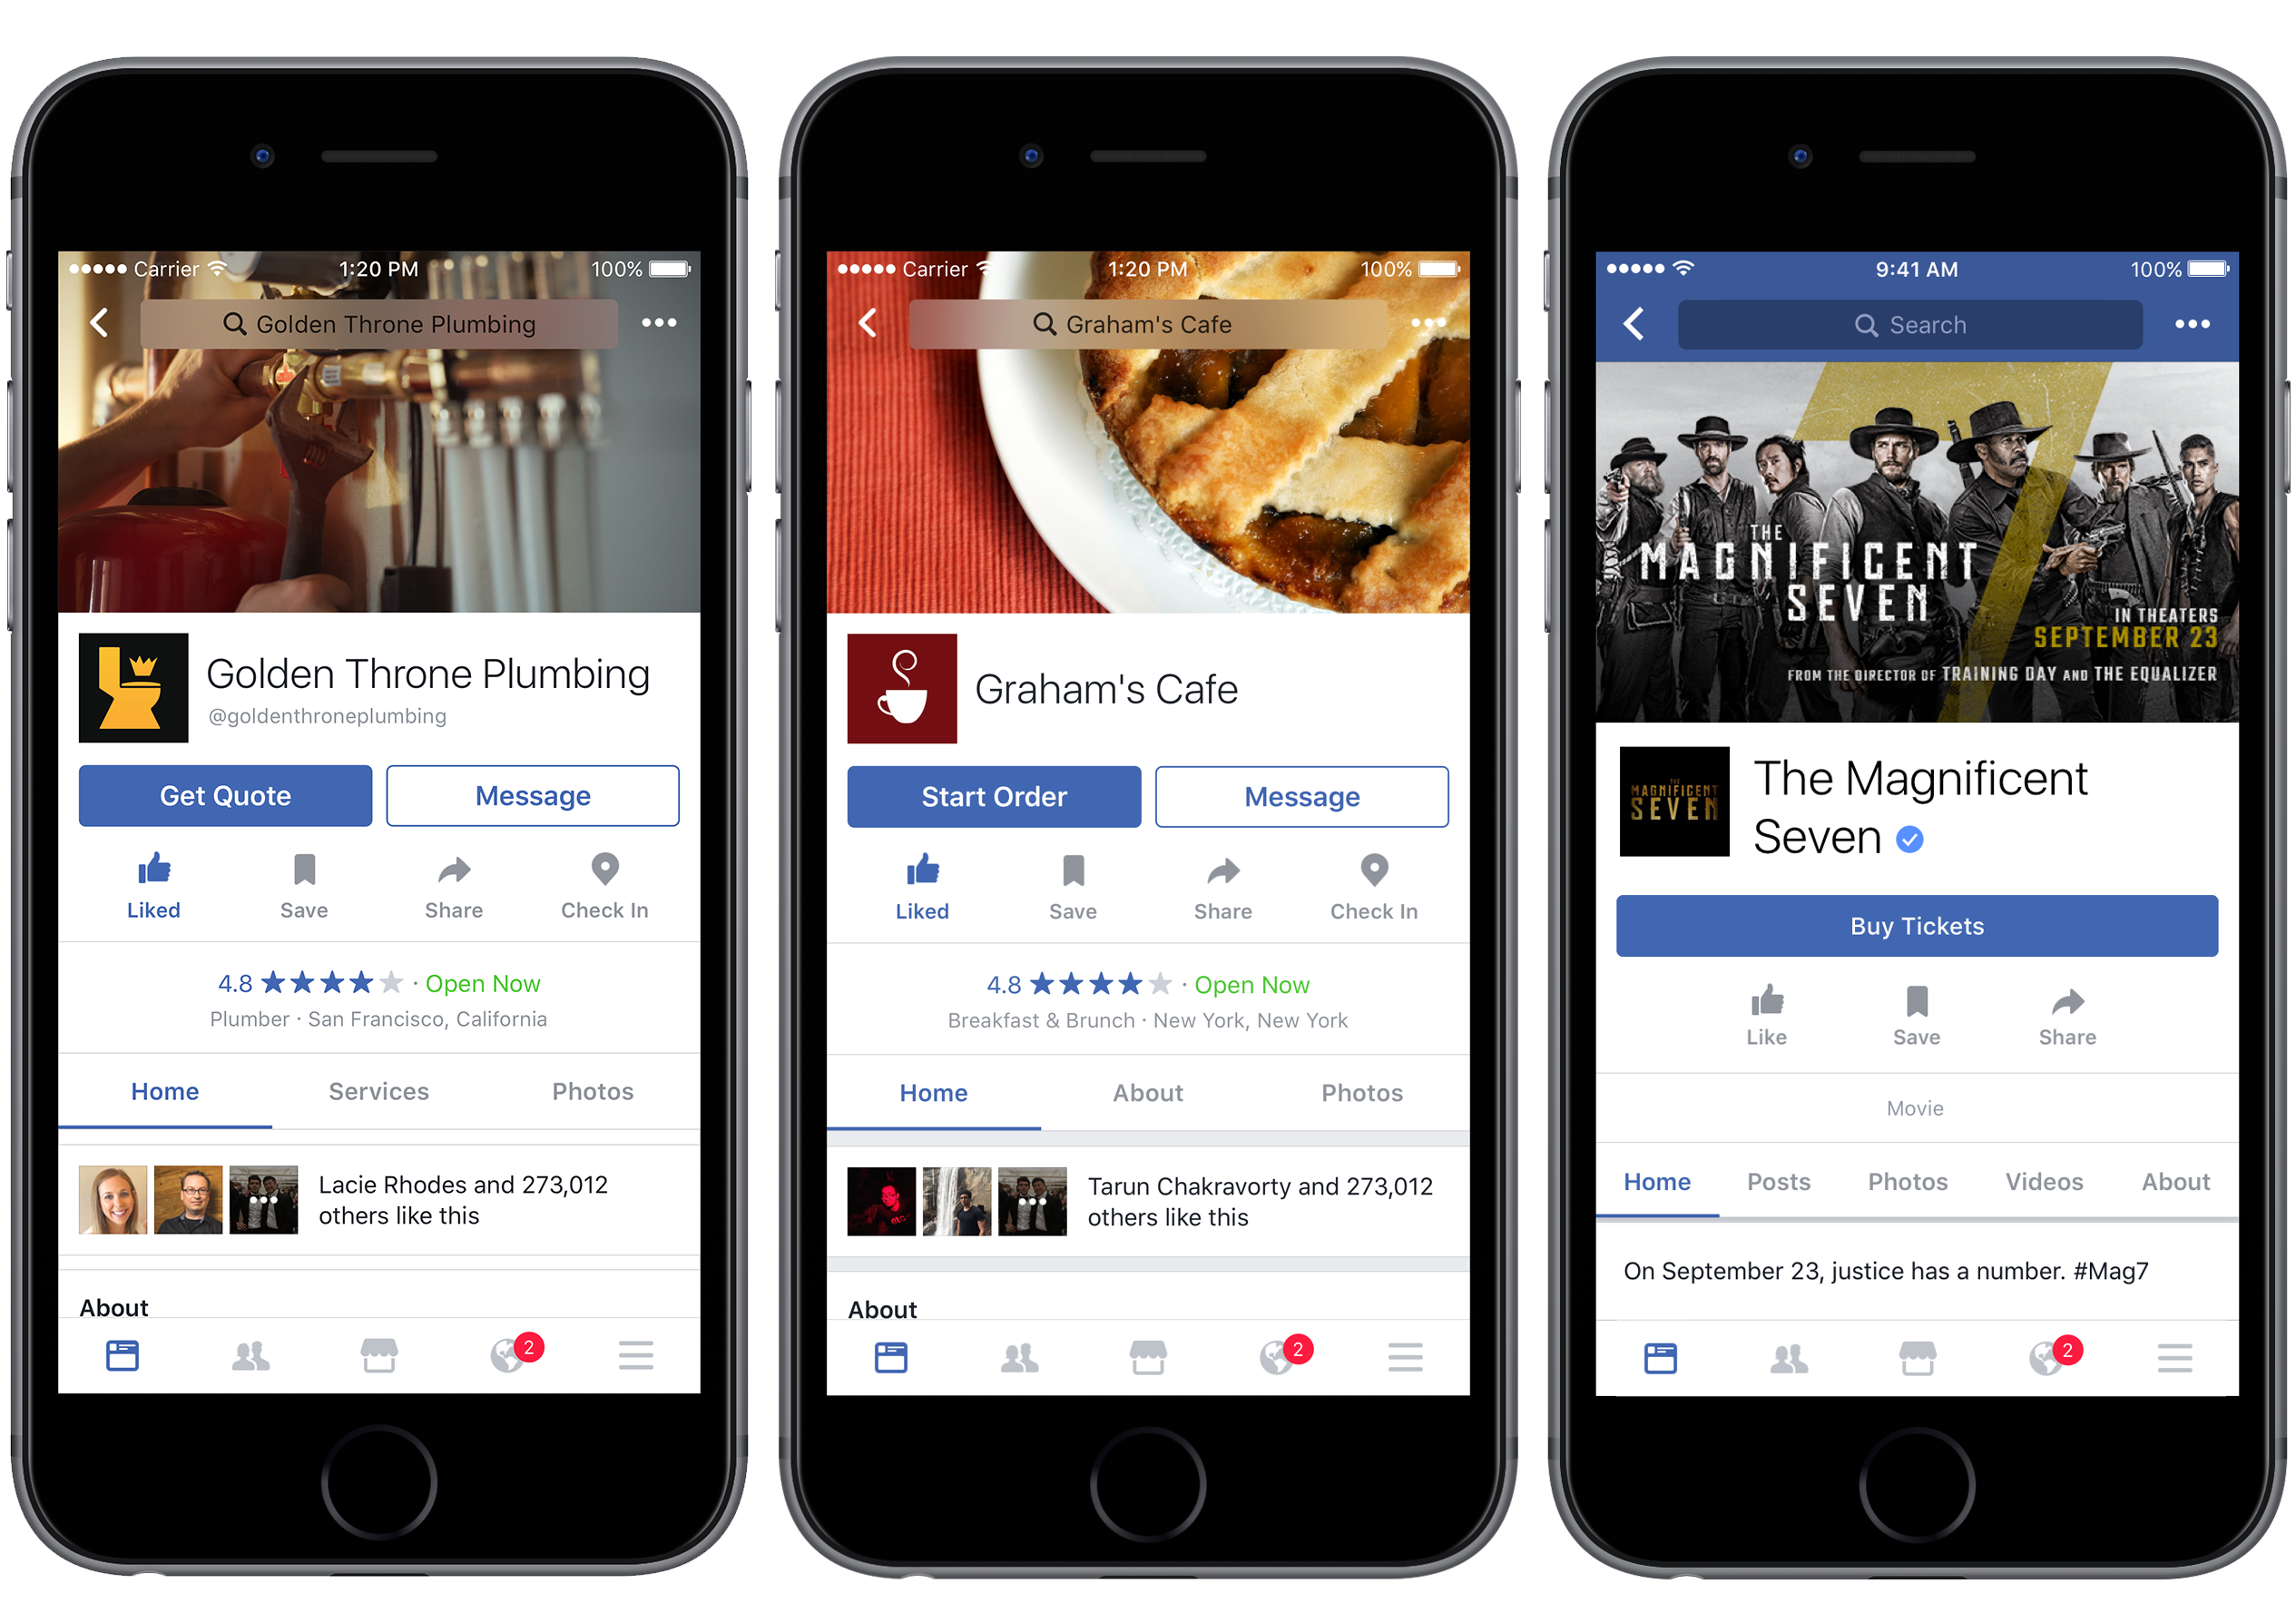 Facebook Food Ordering and Delivery Service